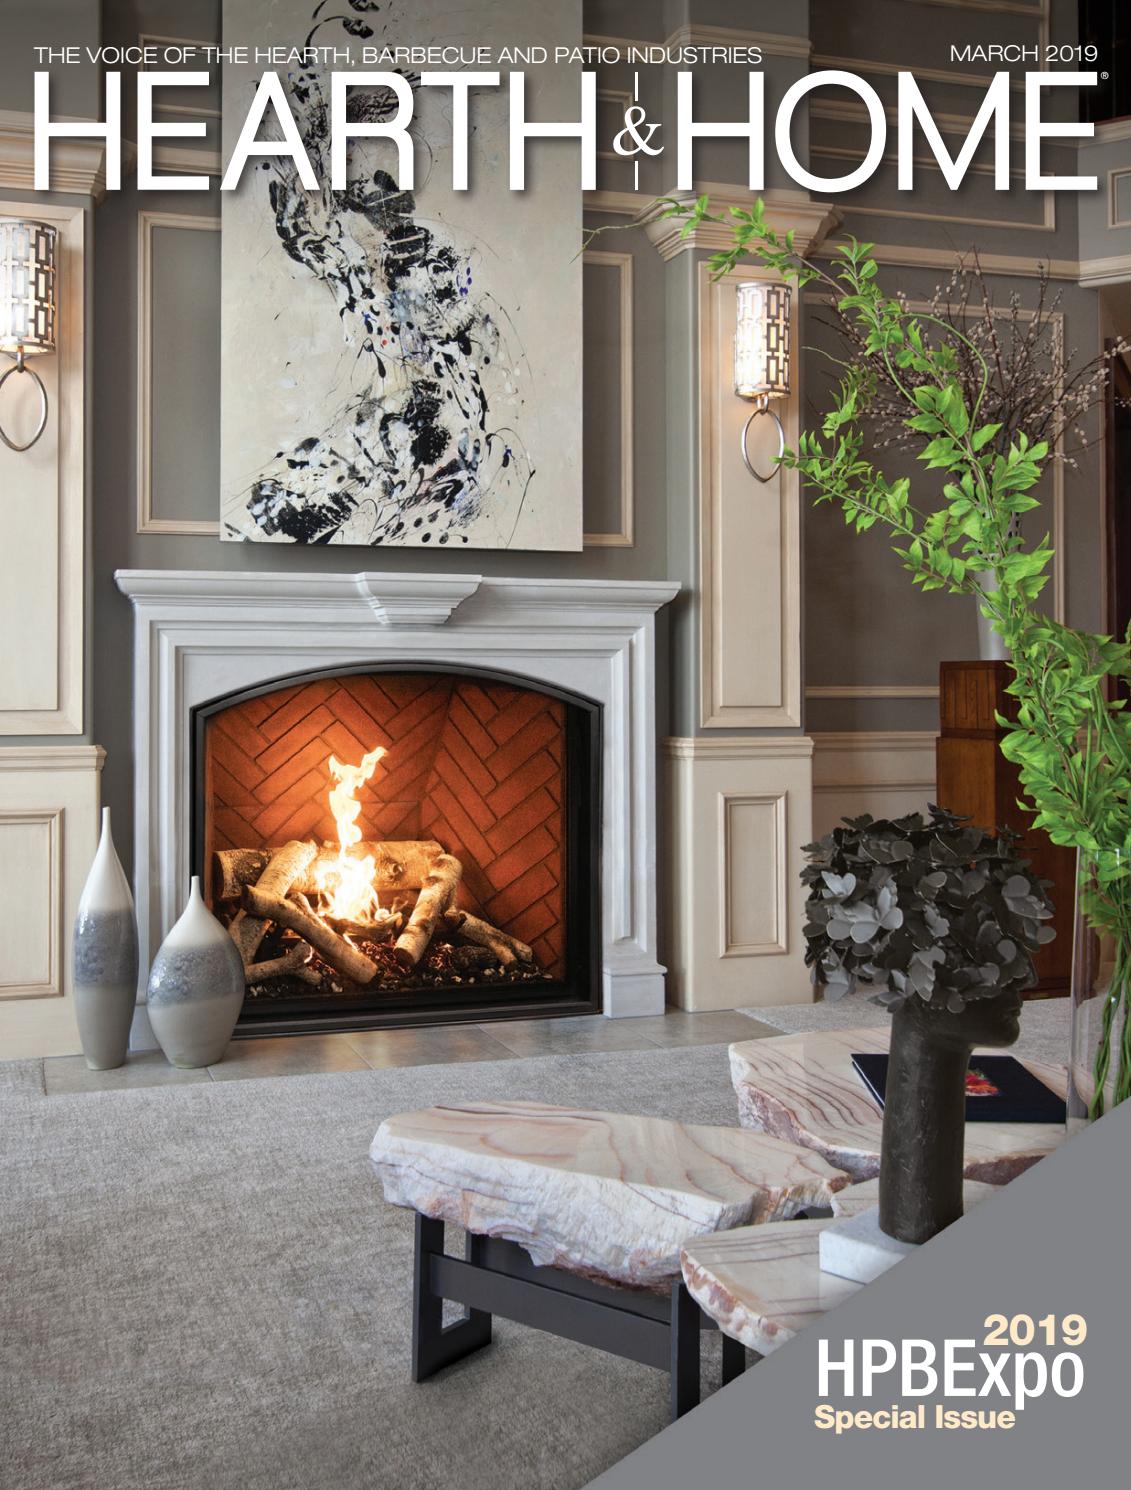 Wayfair Electric Fireplace Inserts Luxury Hearth & Home Magazine – 2019 March issue by Hearth & Home